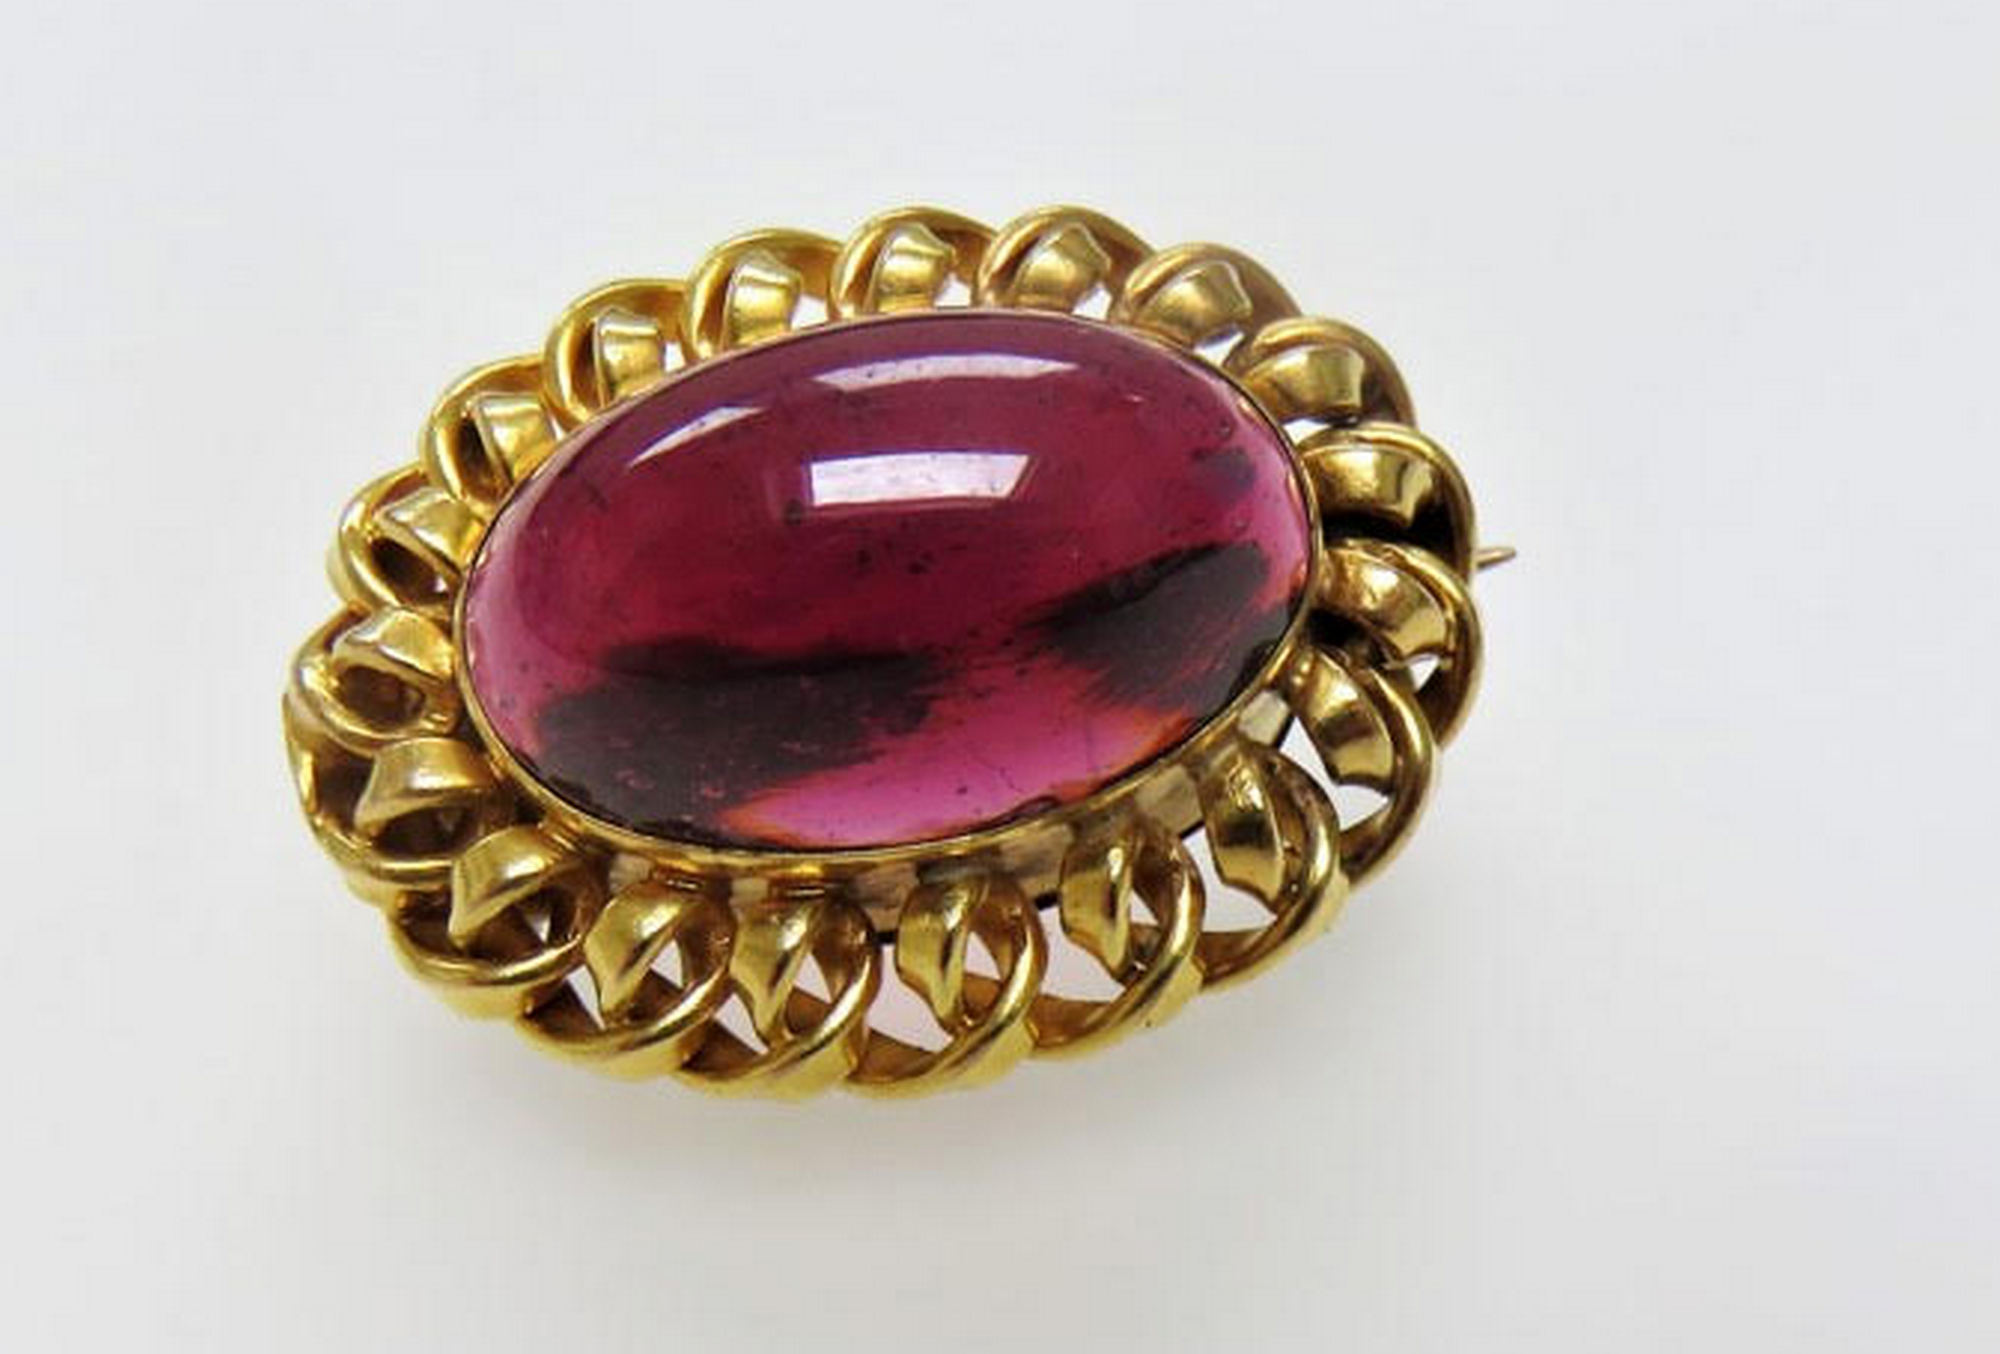 Victorian yellow metal and garnet brooch (tests as 18ct)-secret compartment at back of brooch.